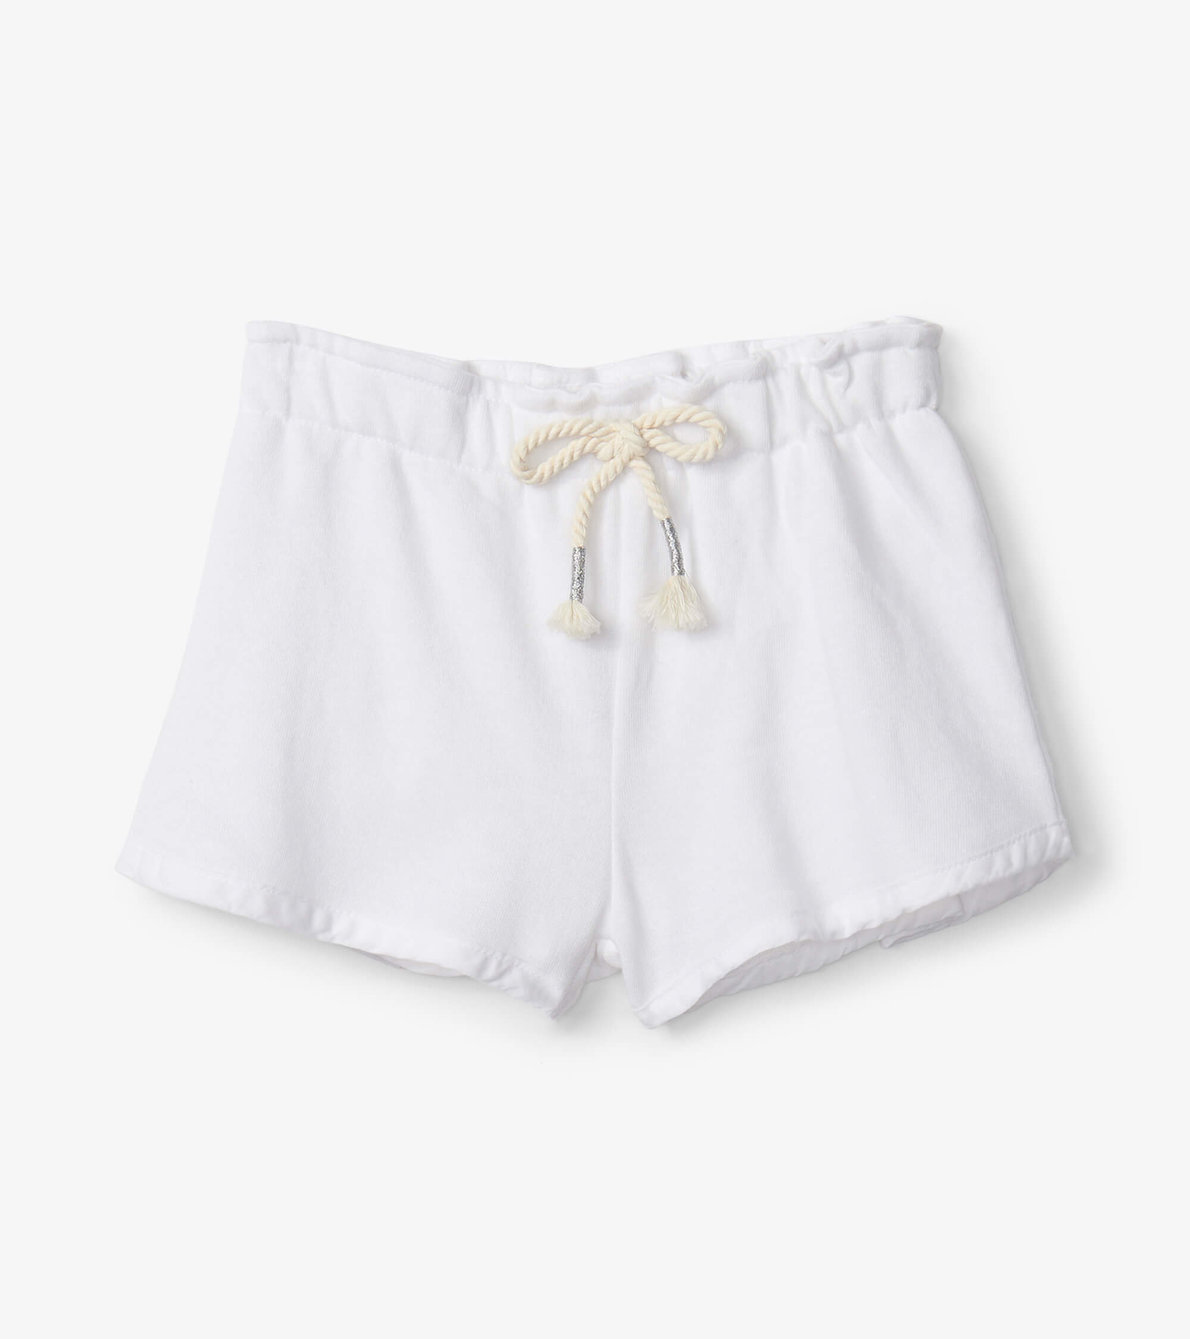 View larger image of Girls White Adventure Shorts